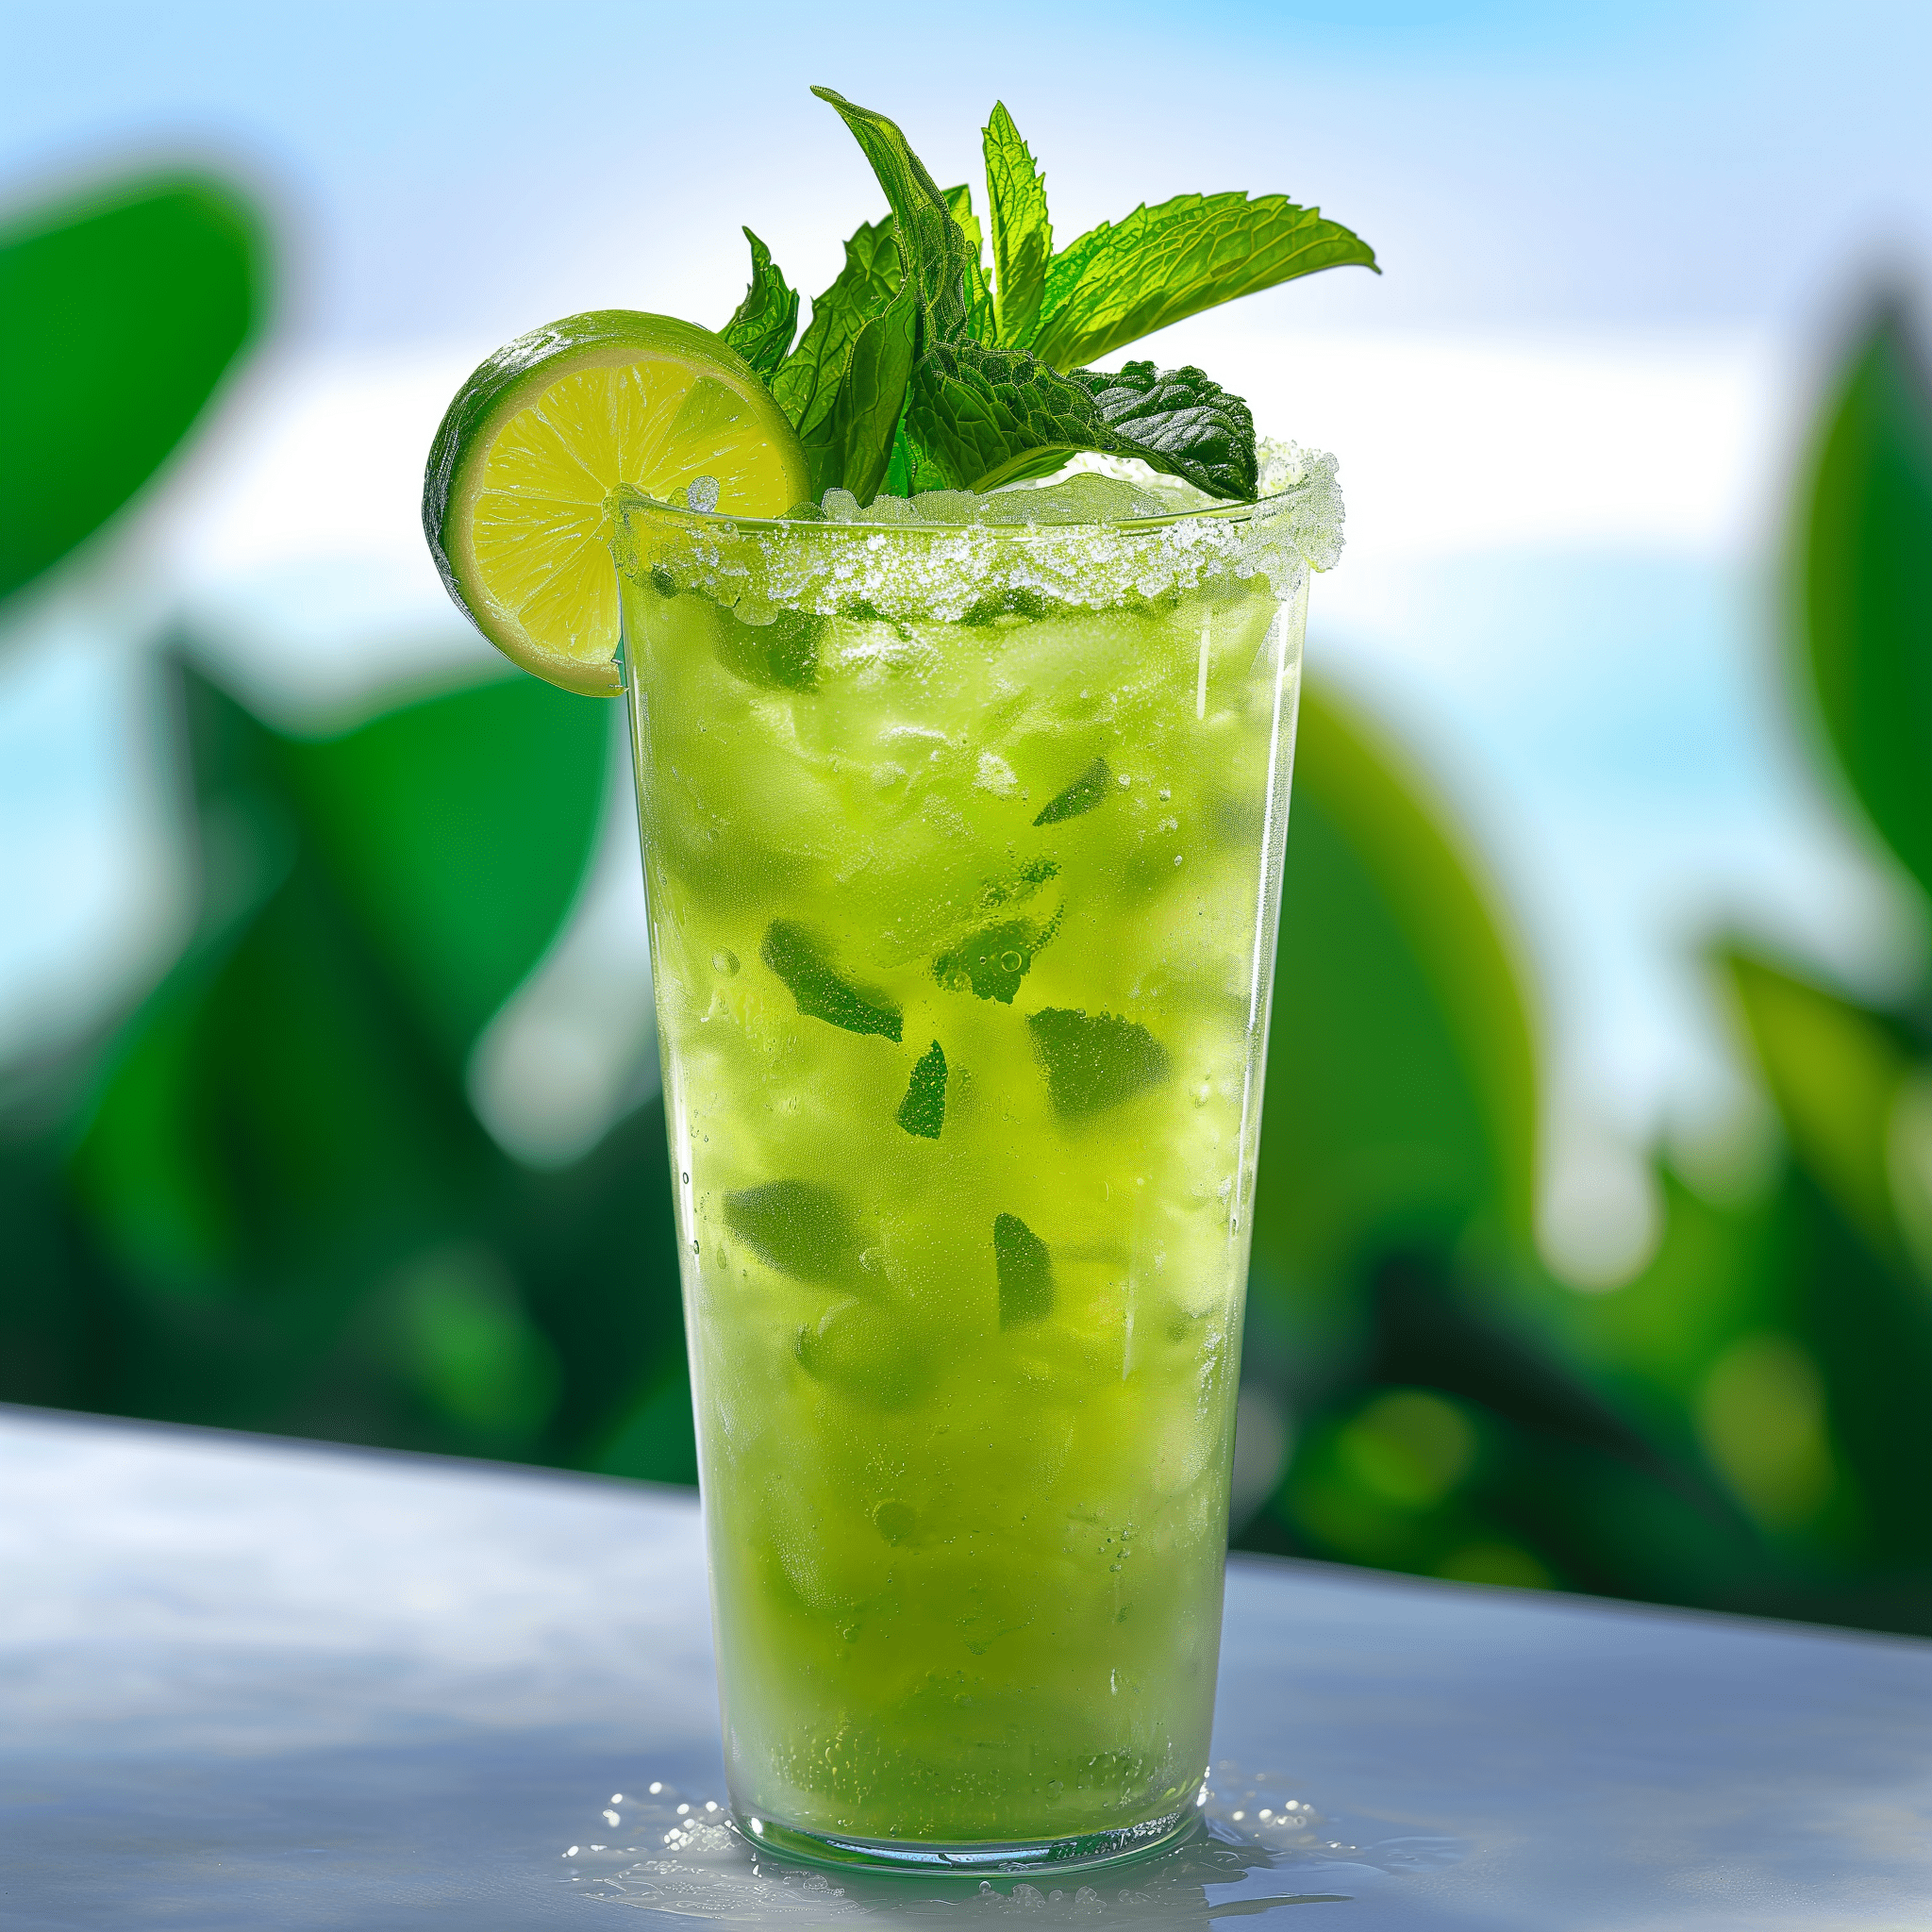 Mastiha Mojito Cocktail Recipe - The Mastiha Mojito offers a refreshing and aromatic experience, with a unique balance of sweet, herbaceous, and slightly resinous flavors. The Mastiha liqueur provides a smooth, slightly piney sweetness, while the mint and lime add a zesty freshness. The rum underlines the cocktail with a subtle warmth, making it an invigorating and complex drink.